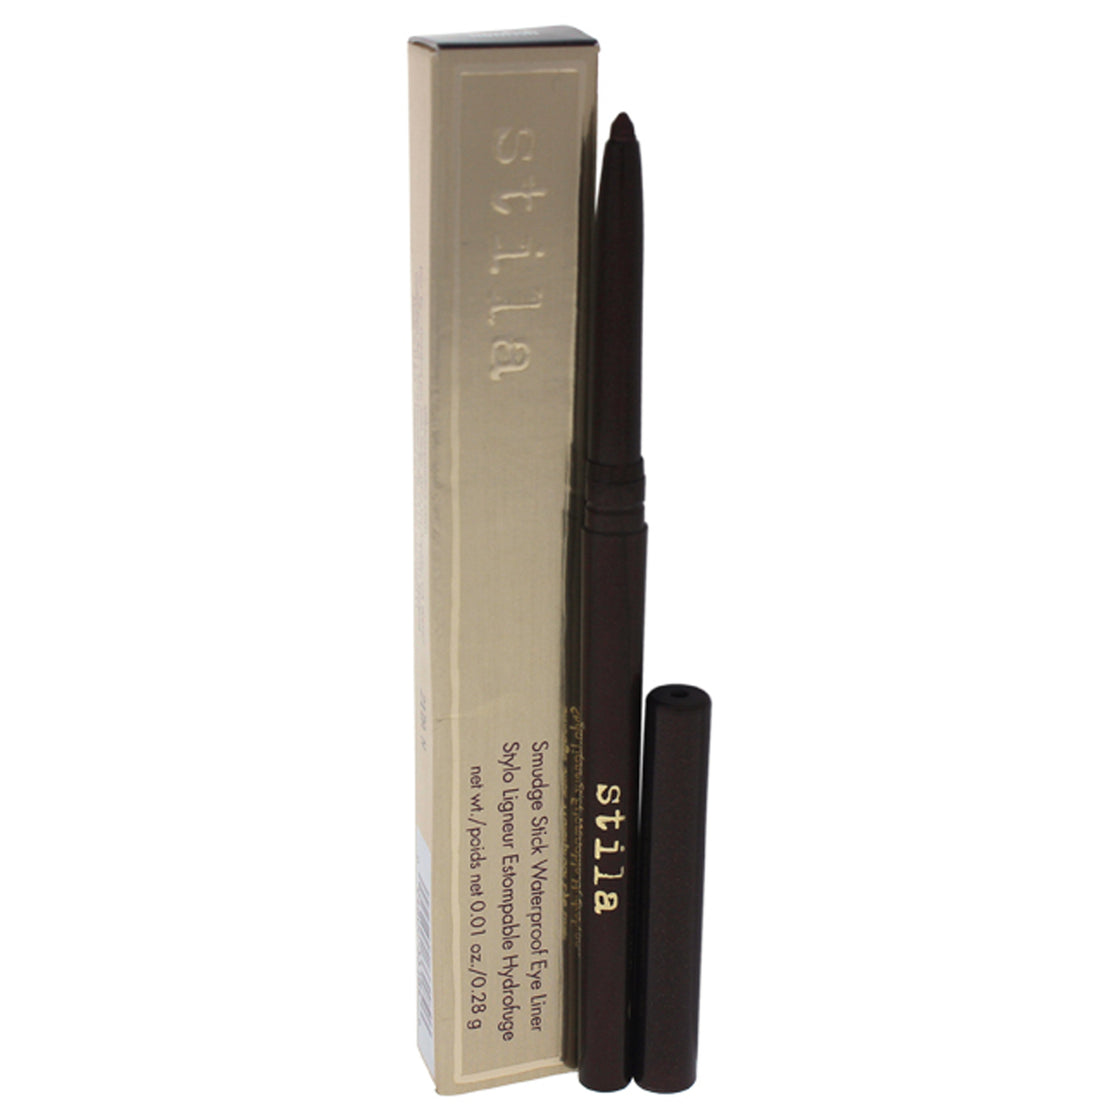 Stay All Day Smudge Stick Waterproof Eye Liner - Lionfish by Stila for Women - 0.01 oz Eyeliner